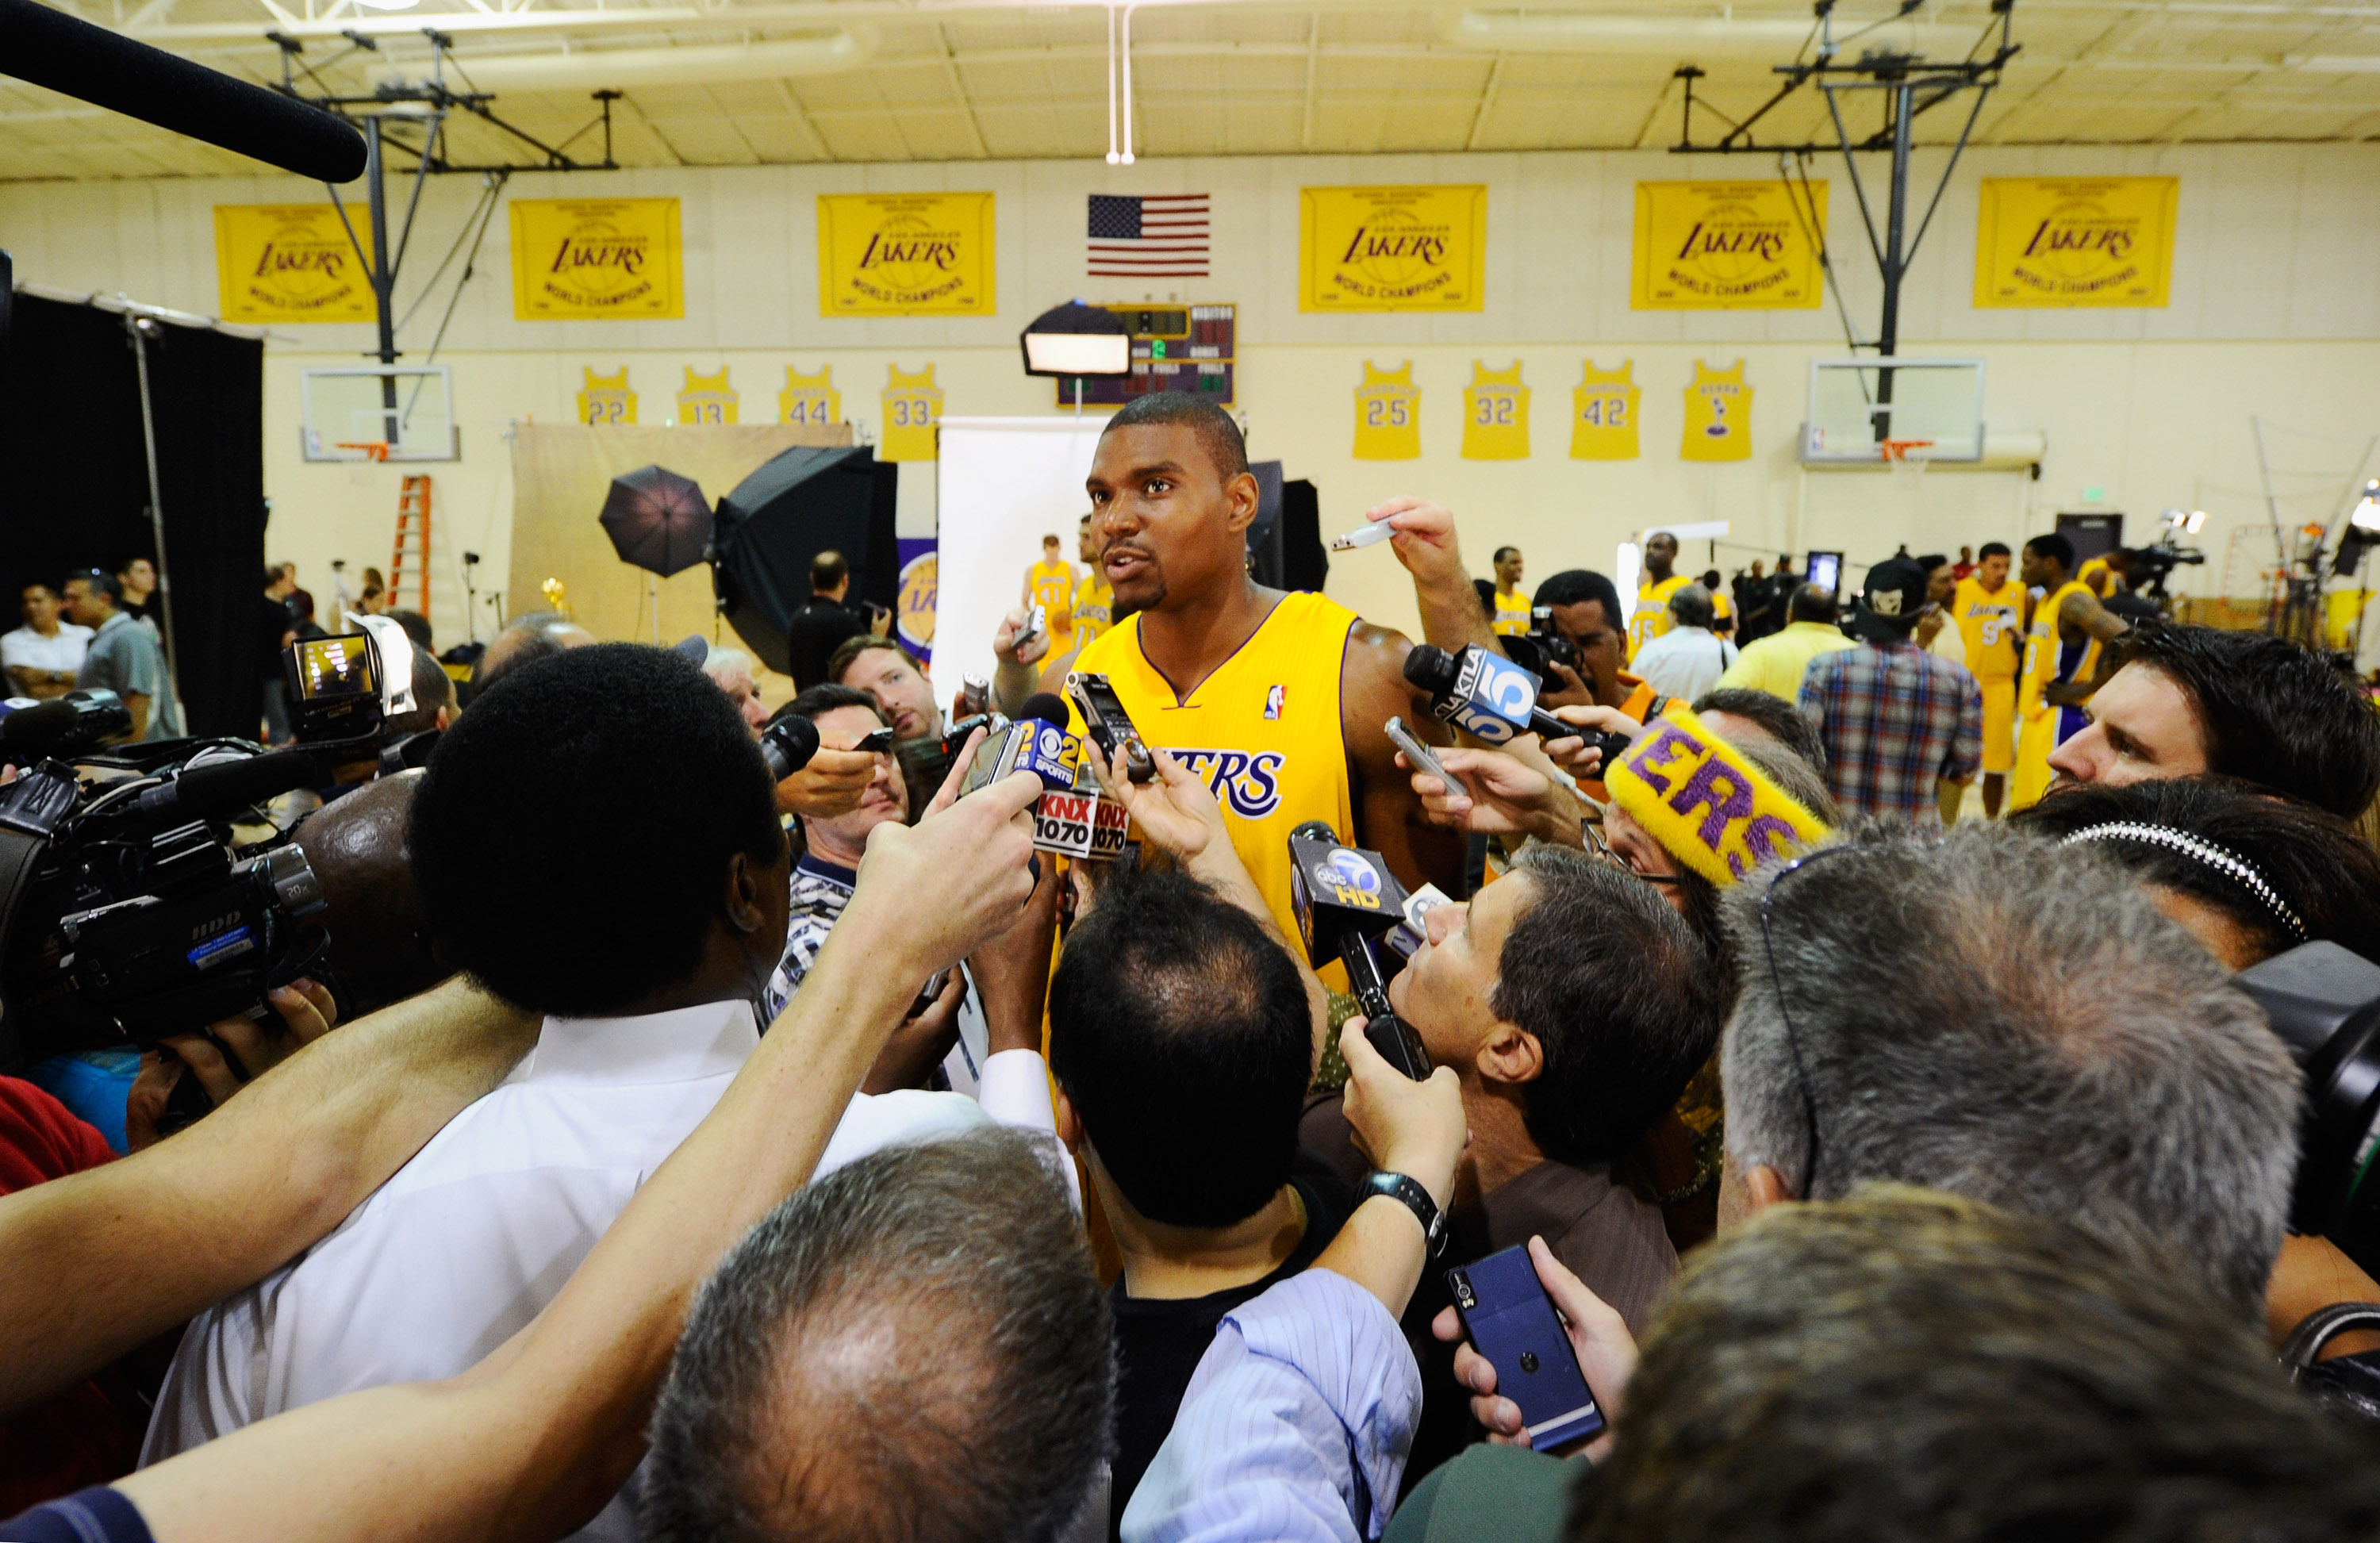 EL SEGUNDO, CA - SEPTEMBER 25:  Andrew Bynum #17 of the Los Angeles Lakers speaks to reporters at a news conference during Media Day at the Toyota Center on September 25, 2010 in El Segundo, California. NOTE TO USER: User expressly acknowledges and agrees